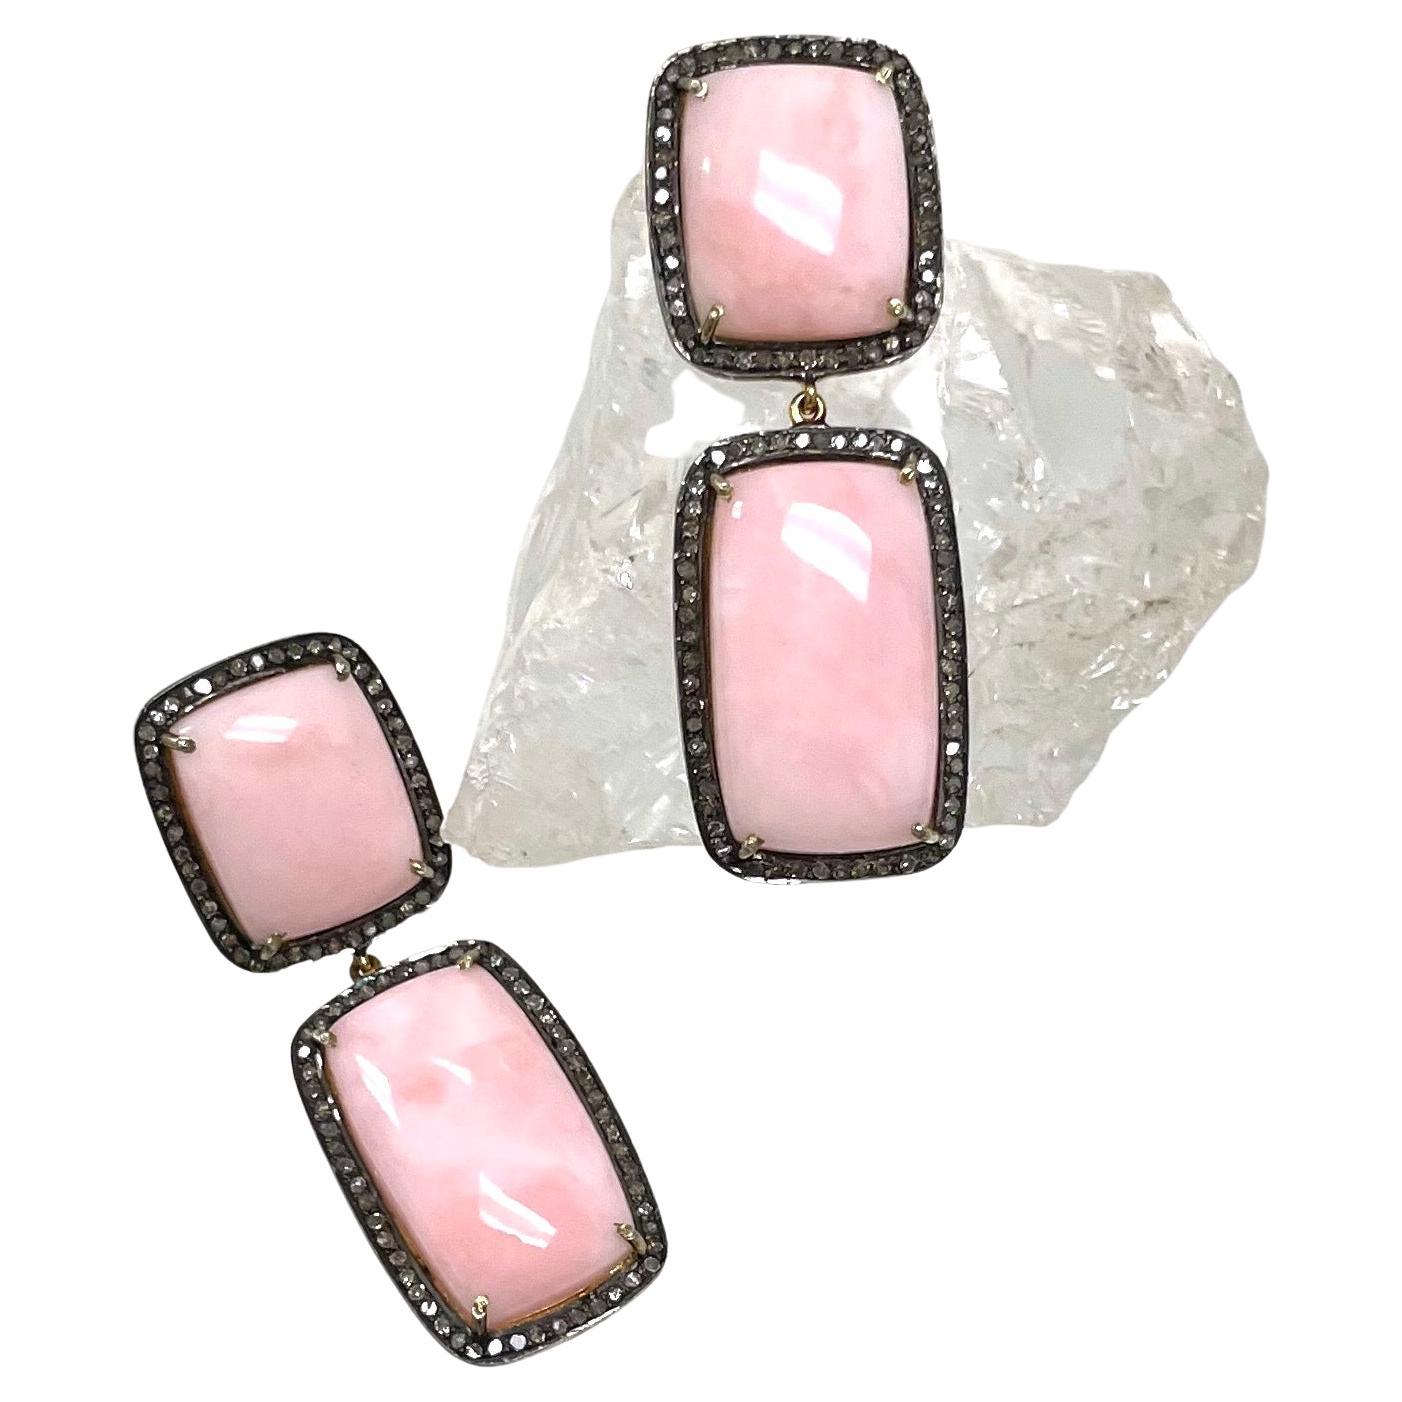 Description
The geometrically shaped pink opal, framed with pave diamonds set in a black background, creates a stylish contrast and an impressive statement. 
Item #E2421

Materials and Weight
Pink opals 44cts
Pave diamonds 1.32cts
Vermeil
14k yellow